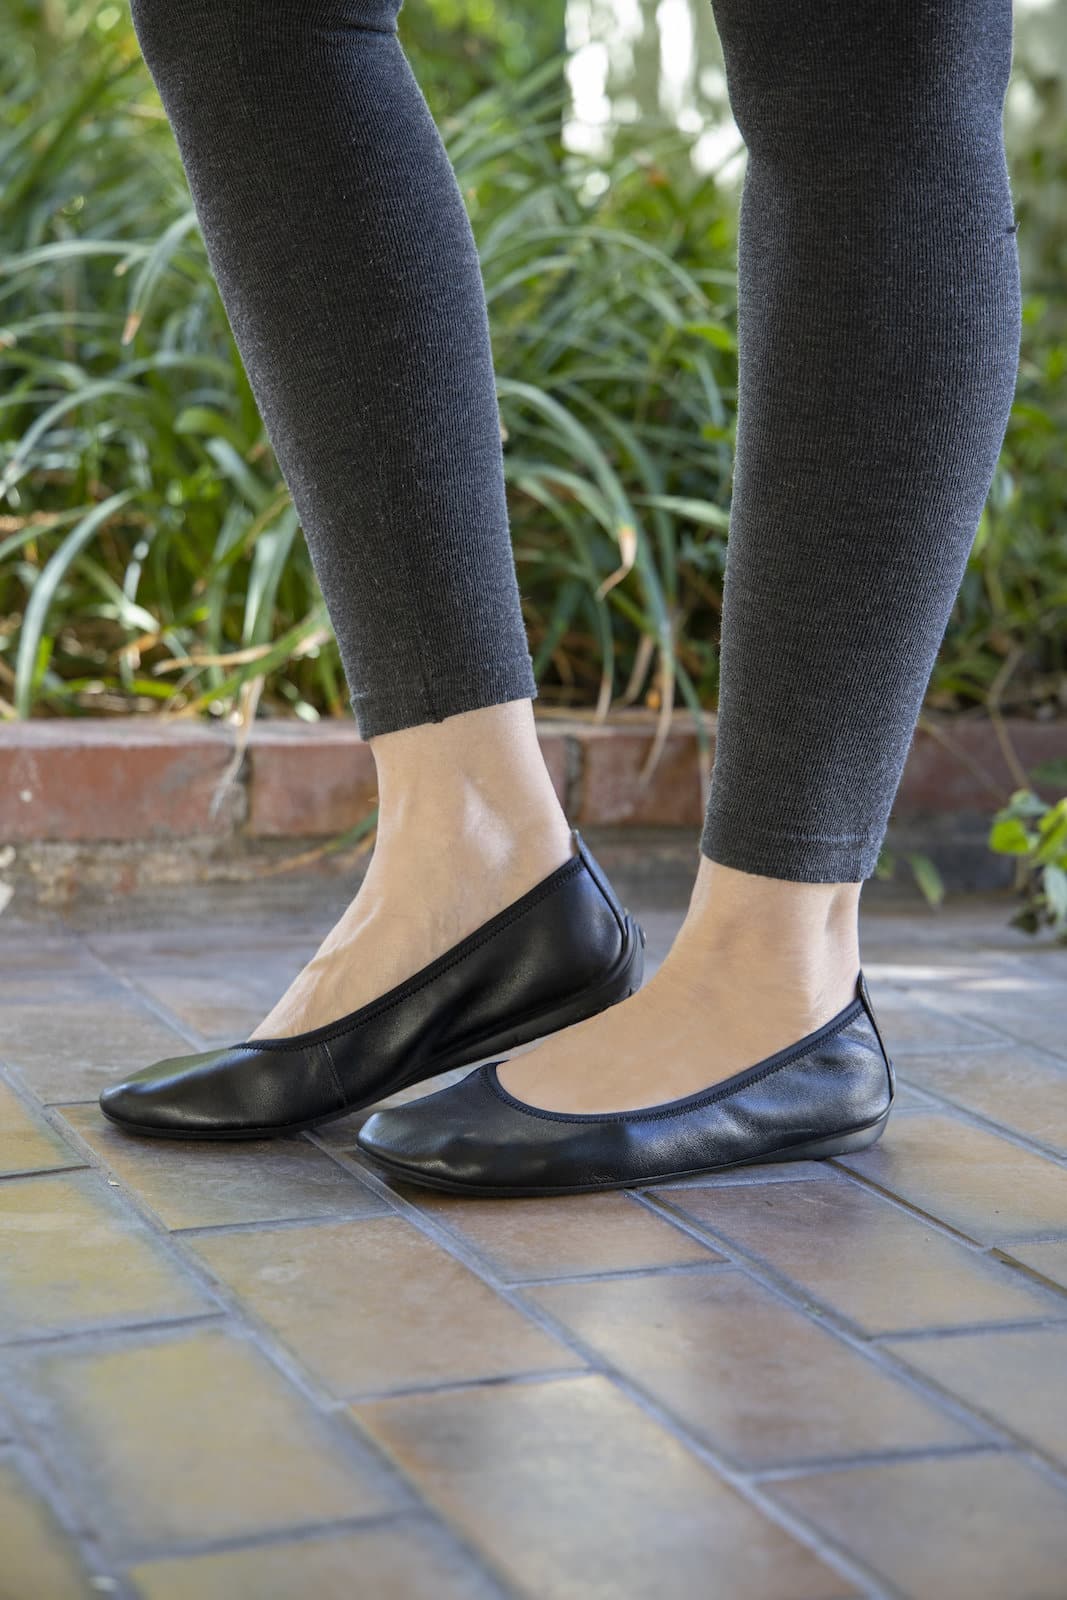 Leather Ballet Flats for a Chic Everyday Look